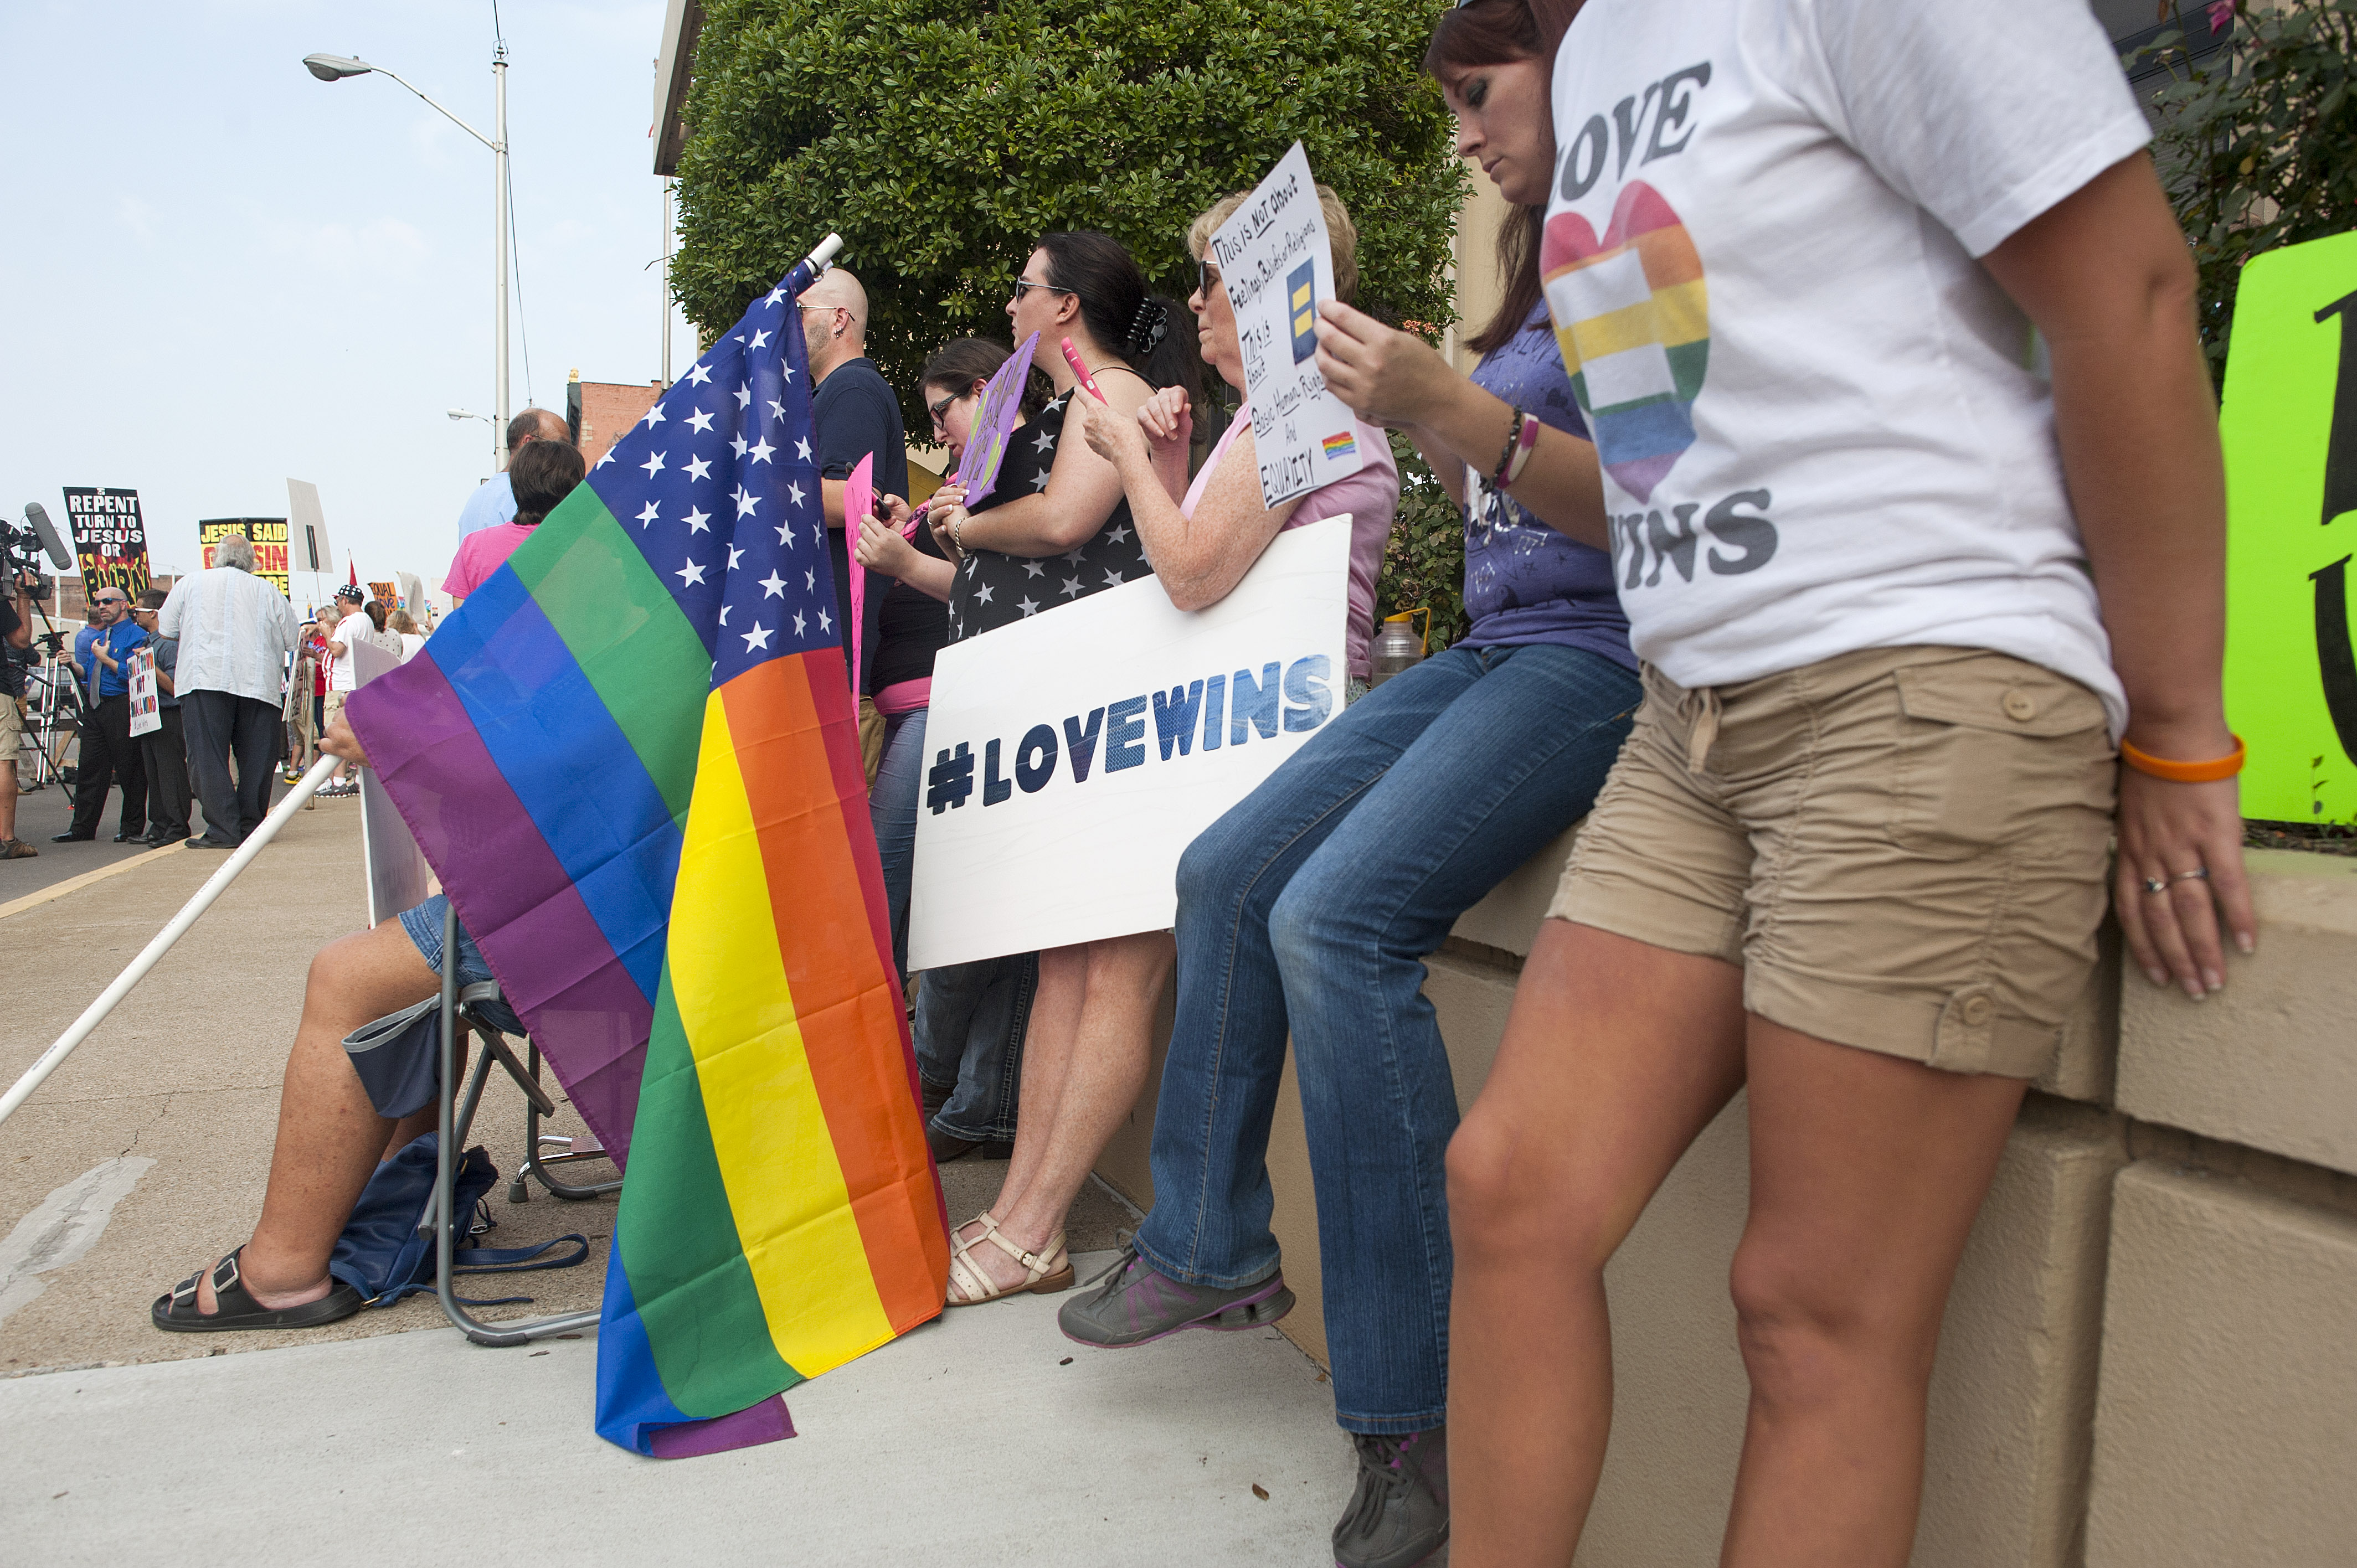 People gather on a tree-lined street, standing and sitting in lawn chairs, wearing shirts and holding signs that support same-sex marriage rights, including “Love wins” and Pride symbols. 